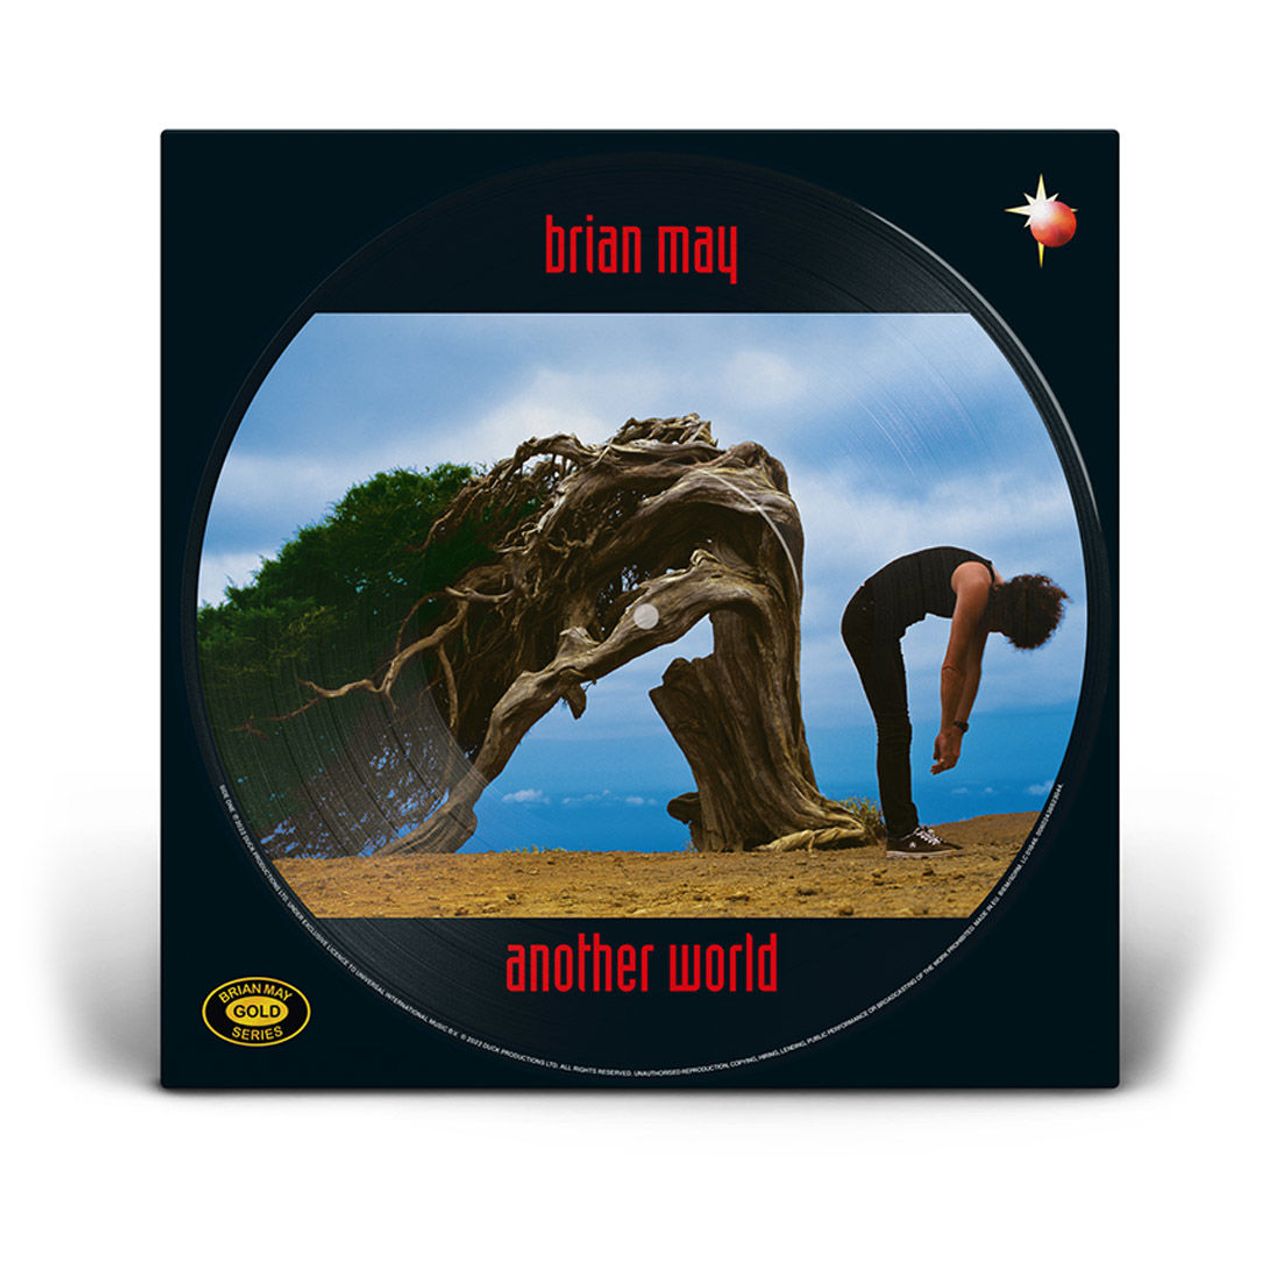 Brian May Another World - Numbered Edition UK picture disc LP (vinyl picture disc album) 00602438623044